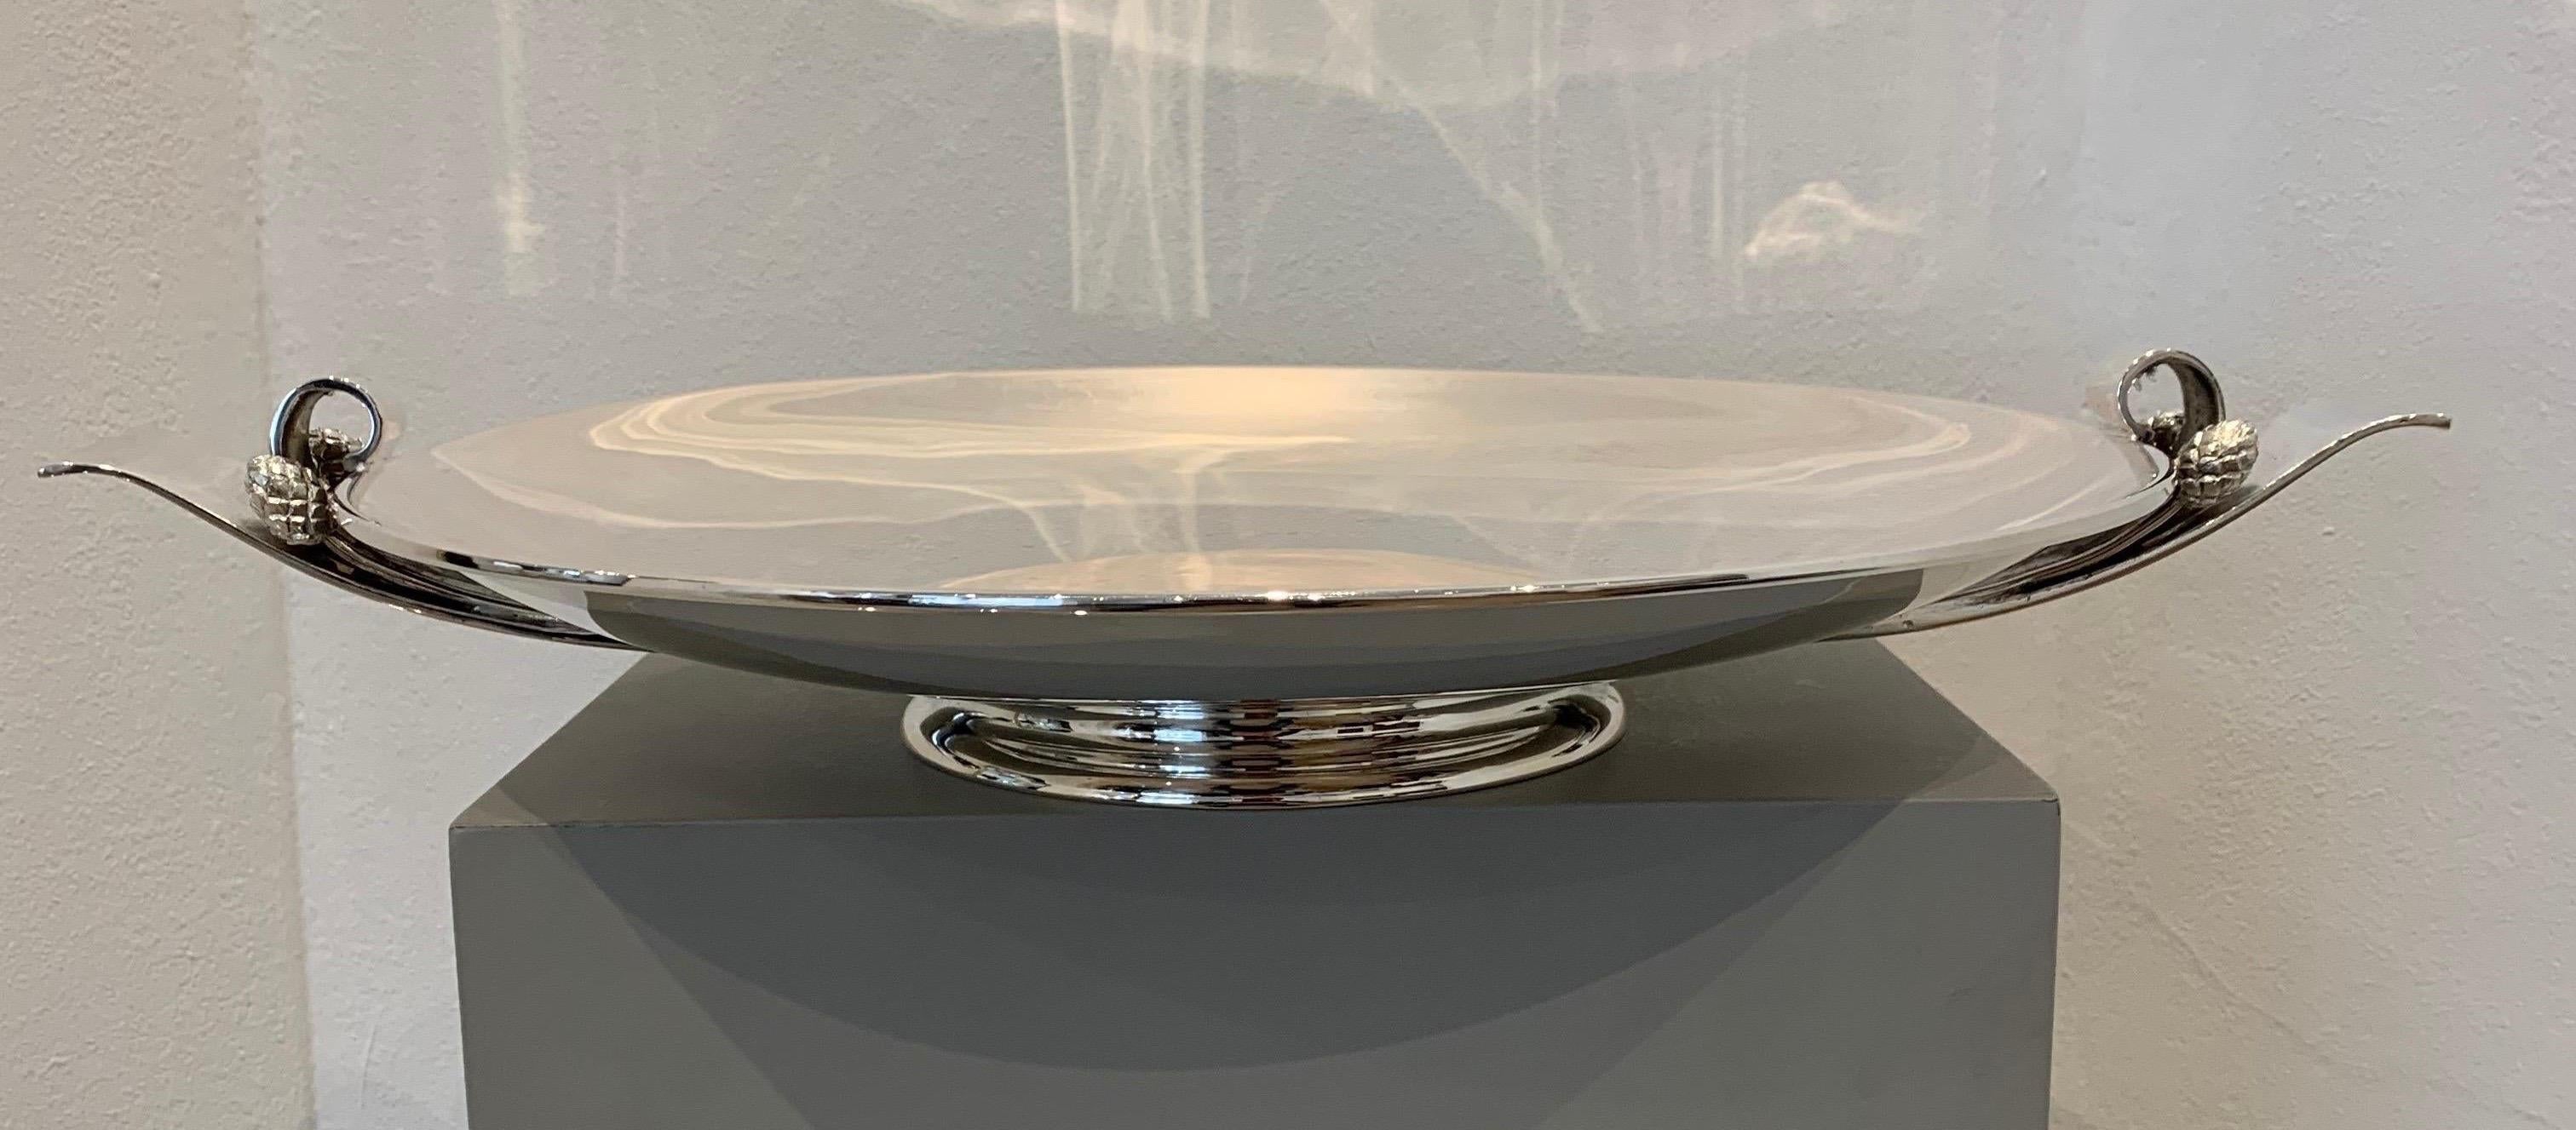 This silver bowl has very neoclassical style typical of the Italian, 1930s. Famous names like Gio Ponti were the promoters of this style, which was the trend at the time among the designers. The piece bears the silver mark 800 for Italian silver.